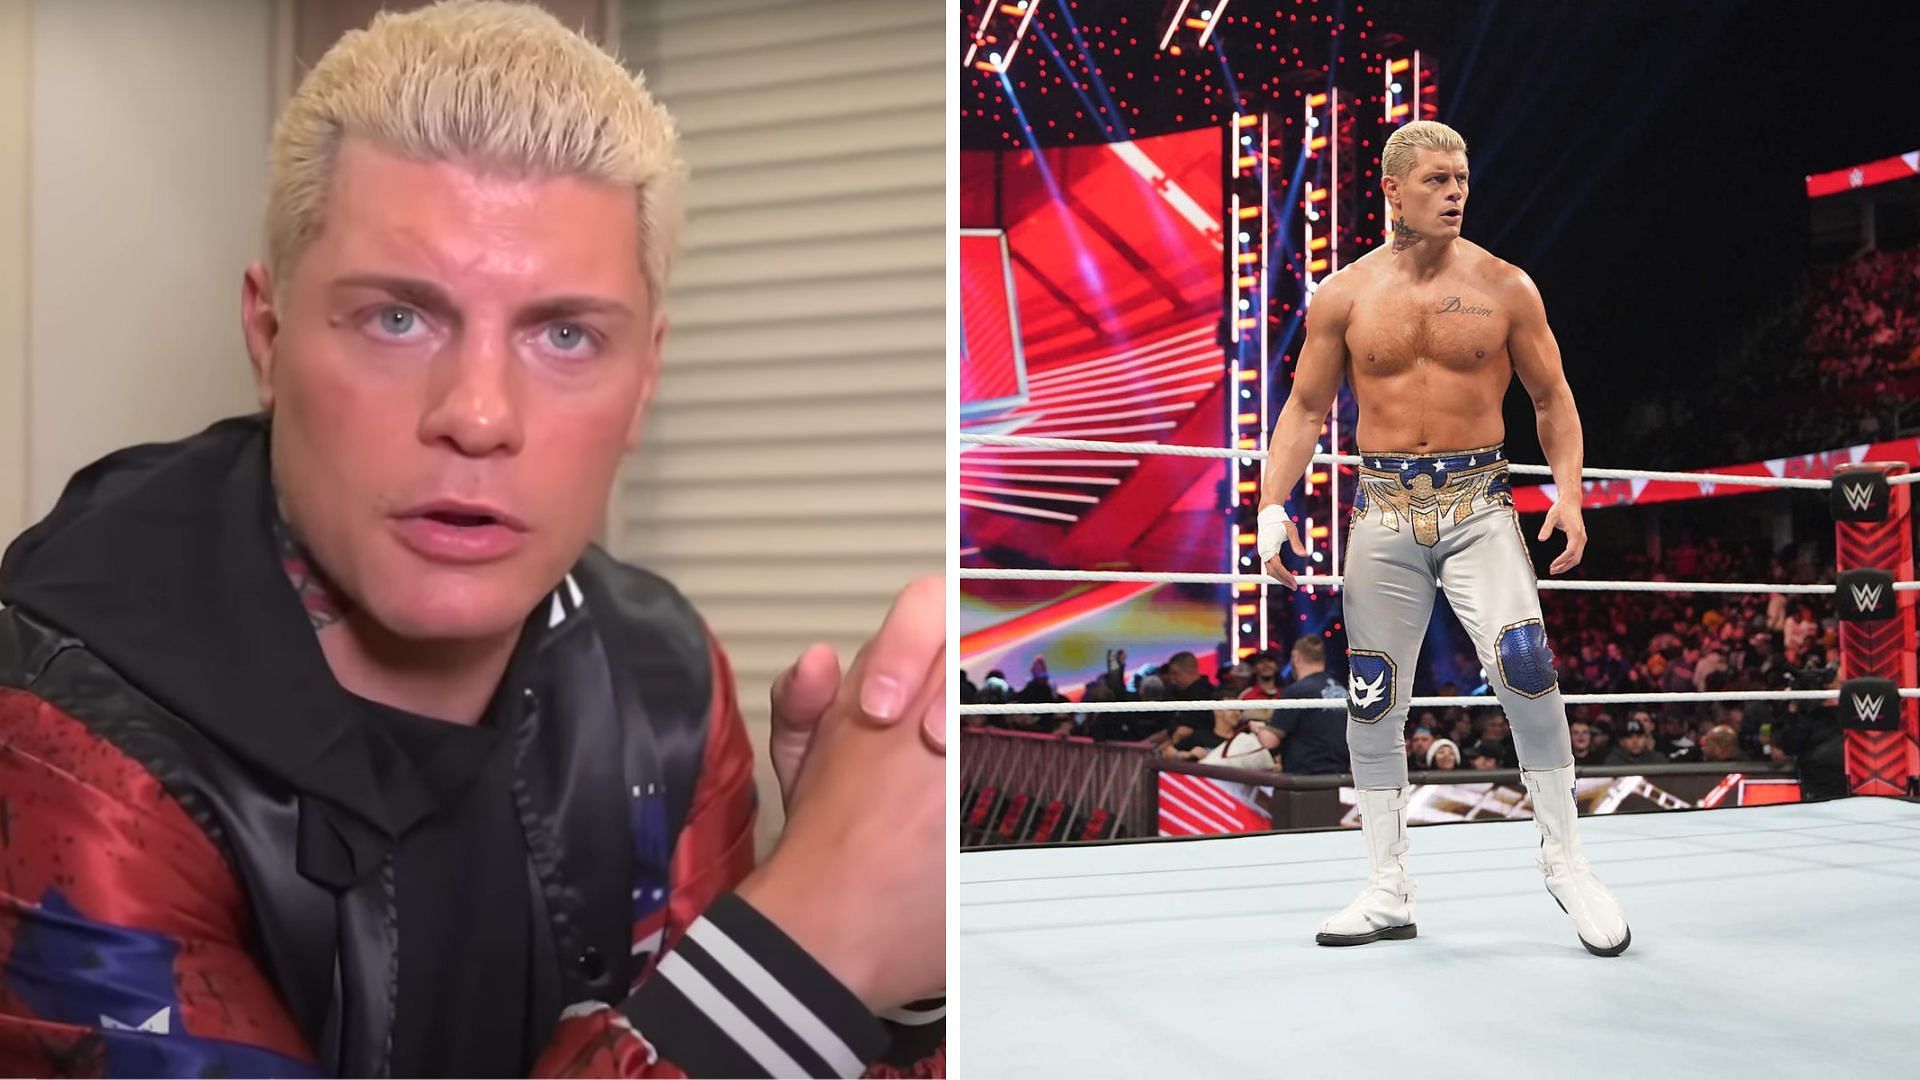 Cody Rhodes is a former Intercontinental Champion